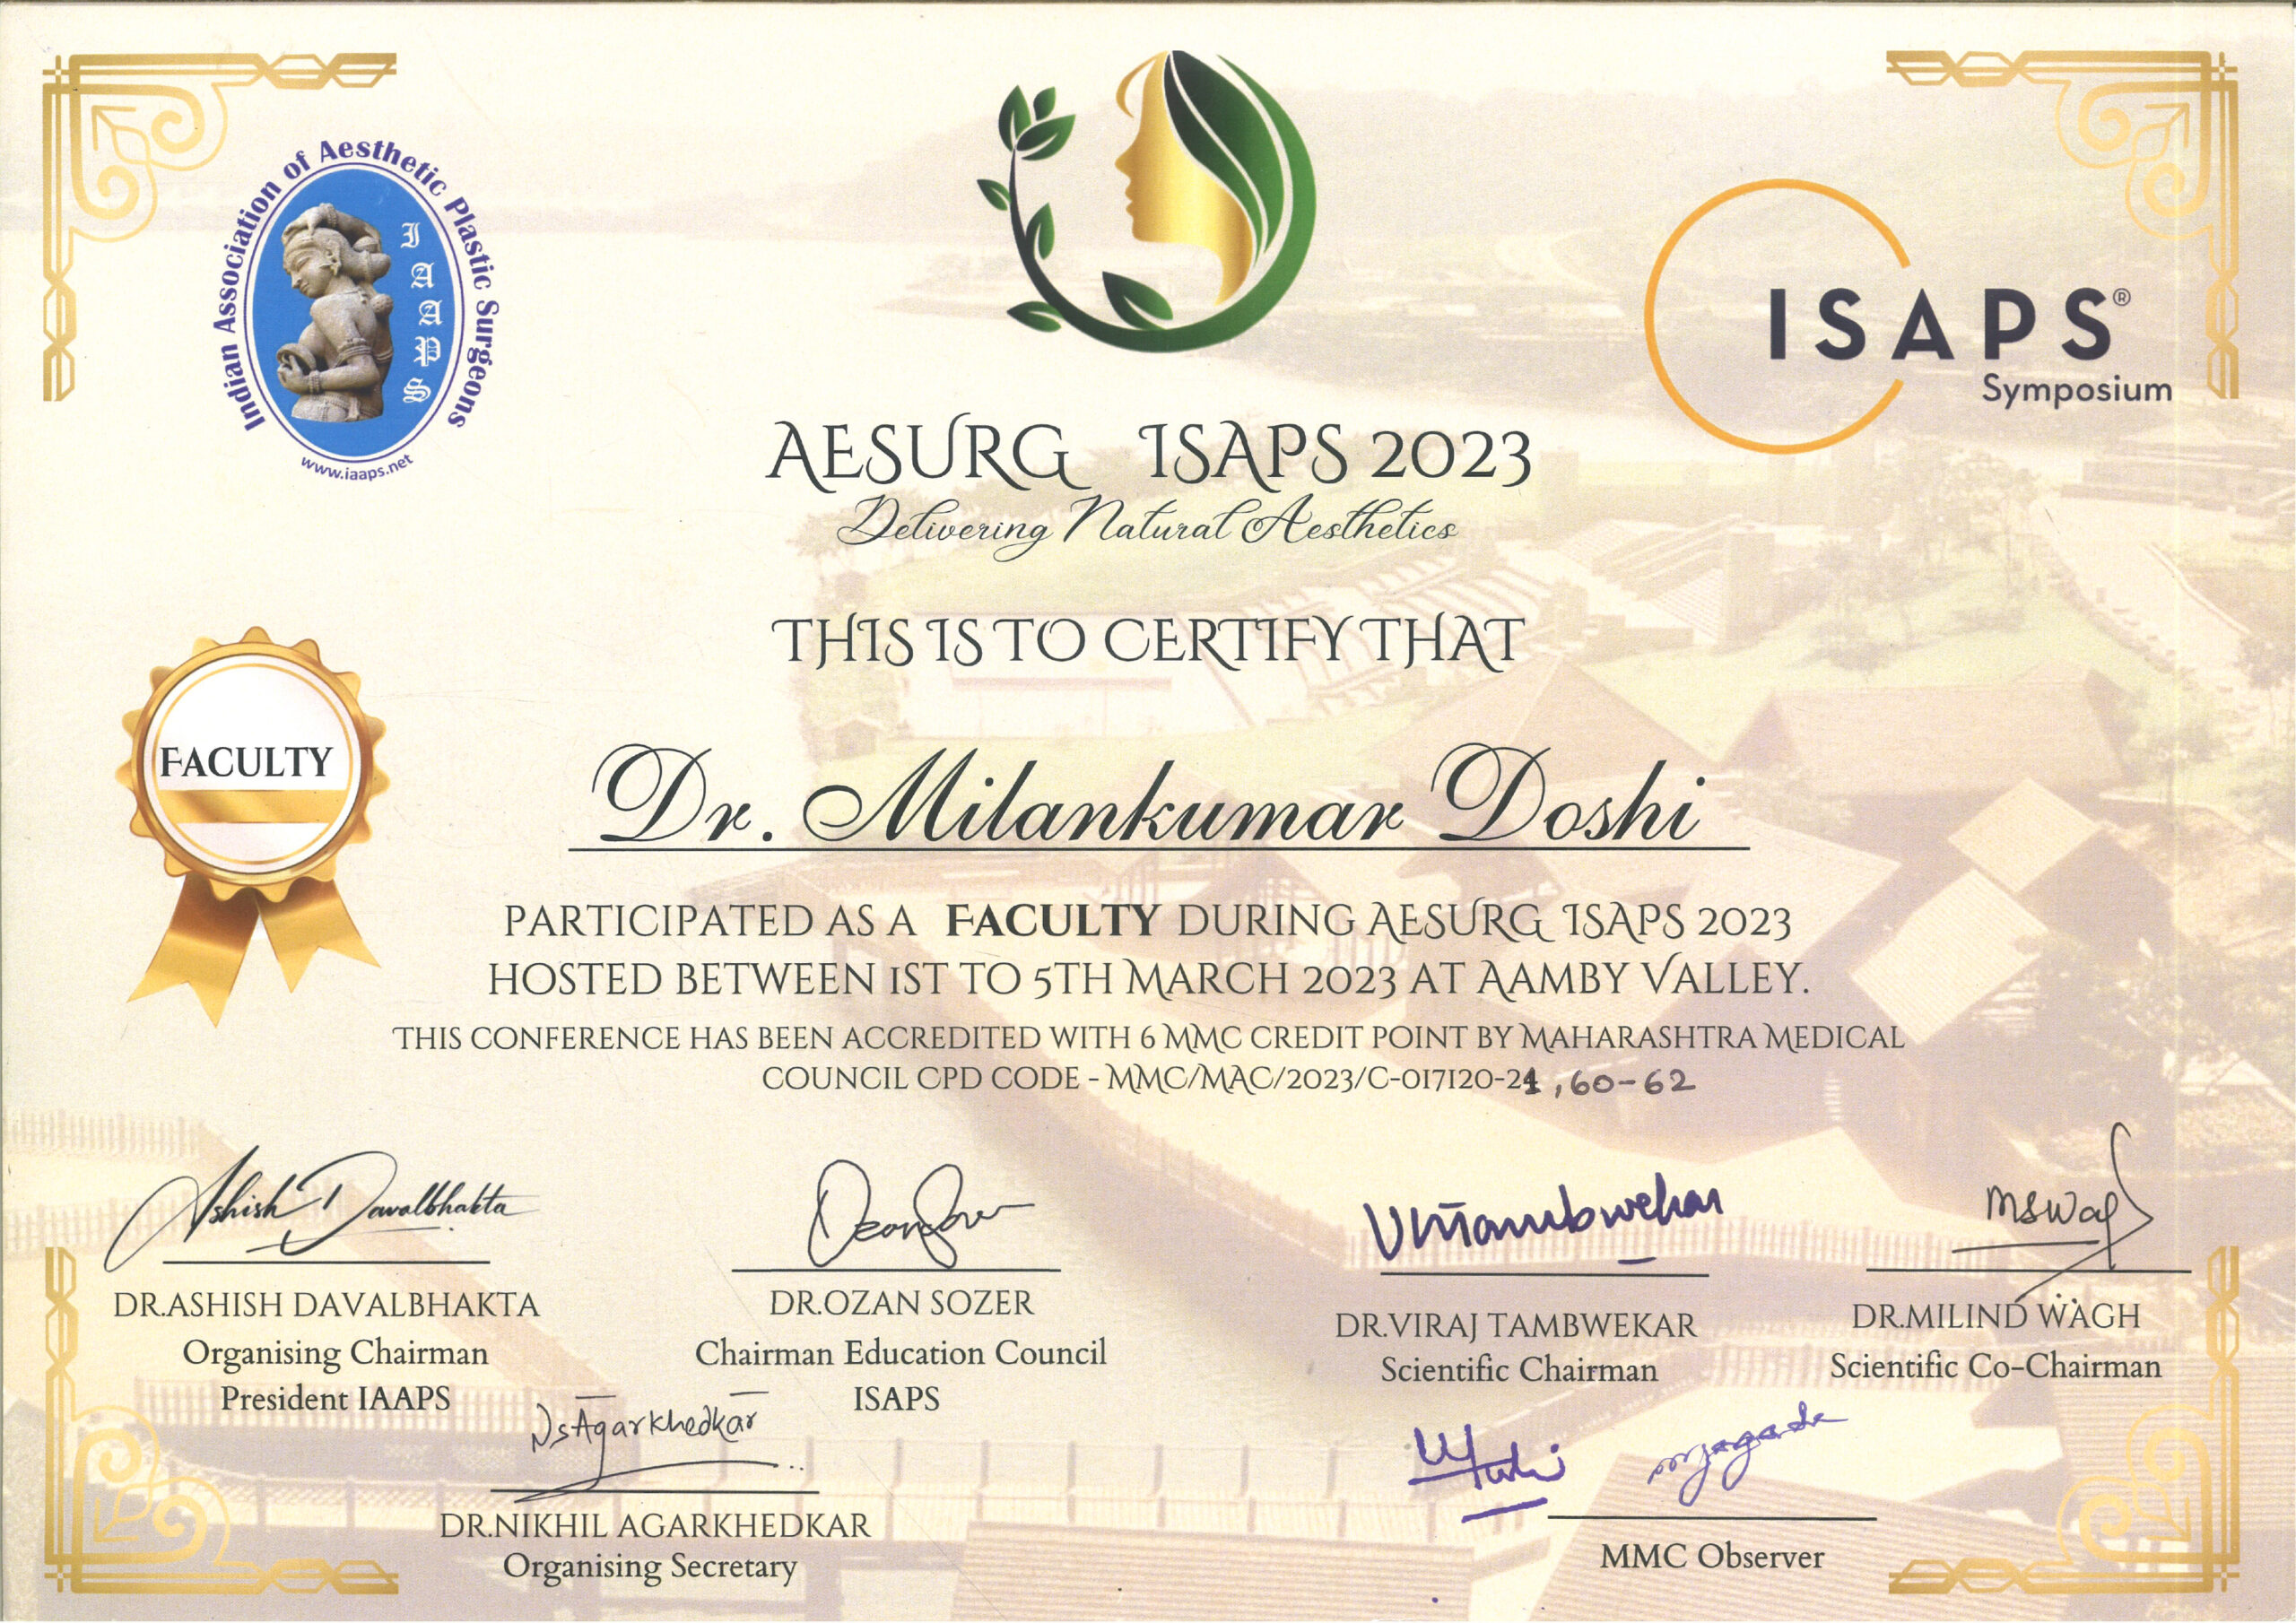 AESURG ISAPS 2023, 1st to 5th March 2023 at Aamby Valley